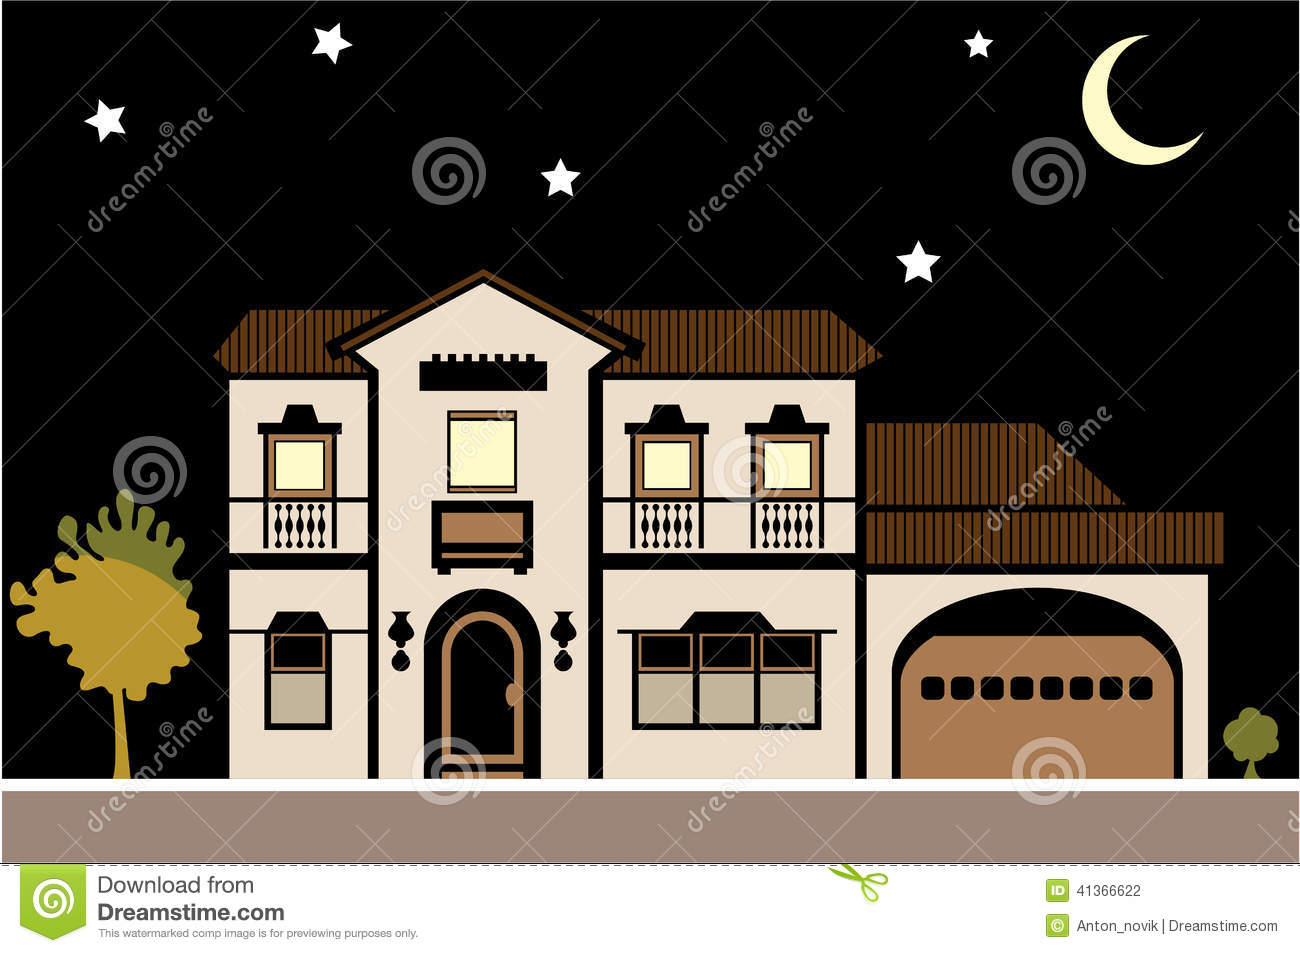 Night panda free images. Mansion clipart cool house